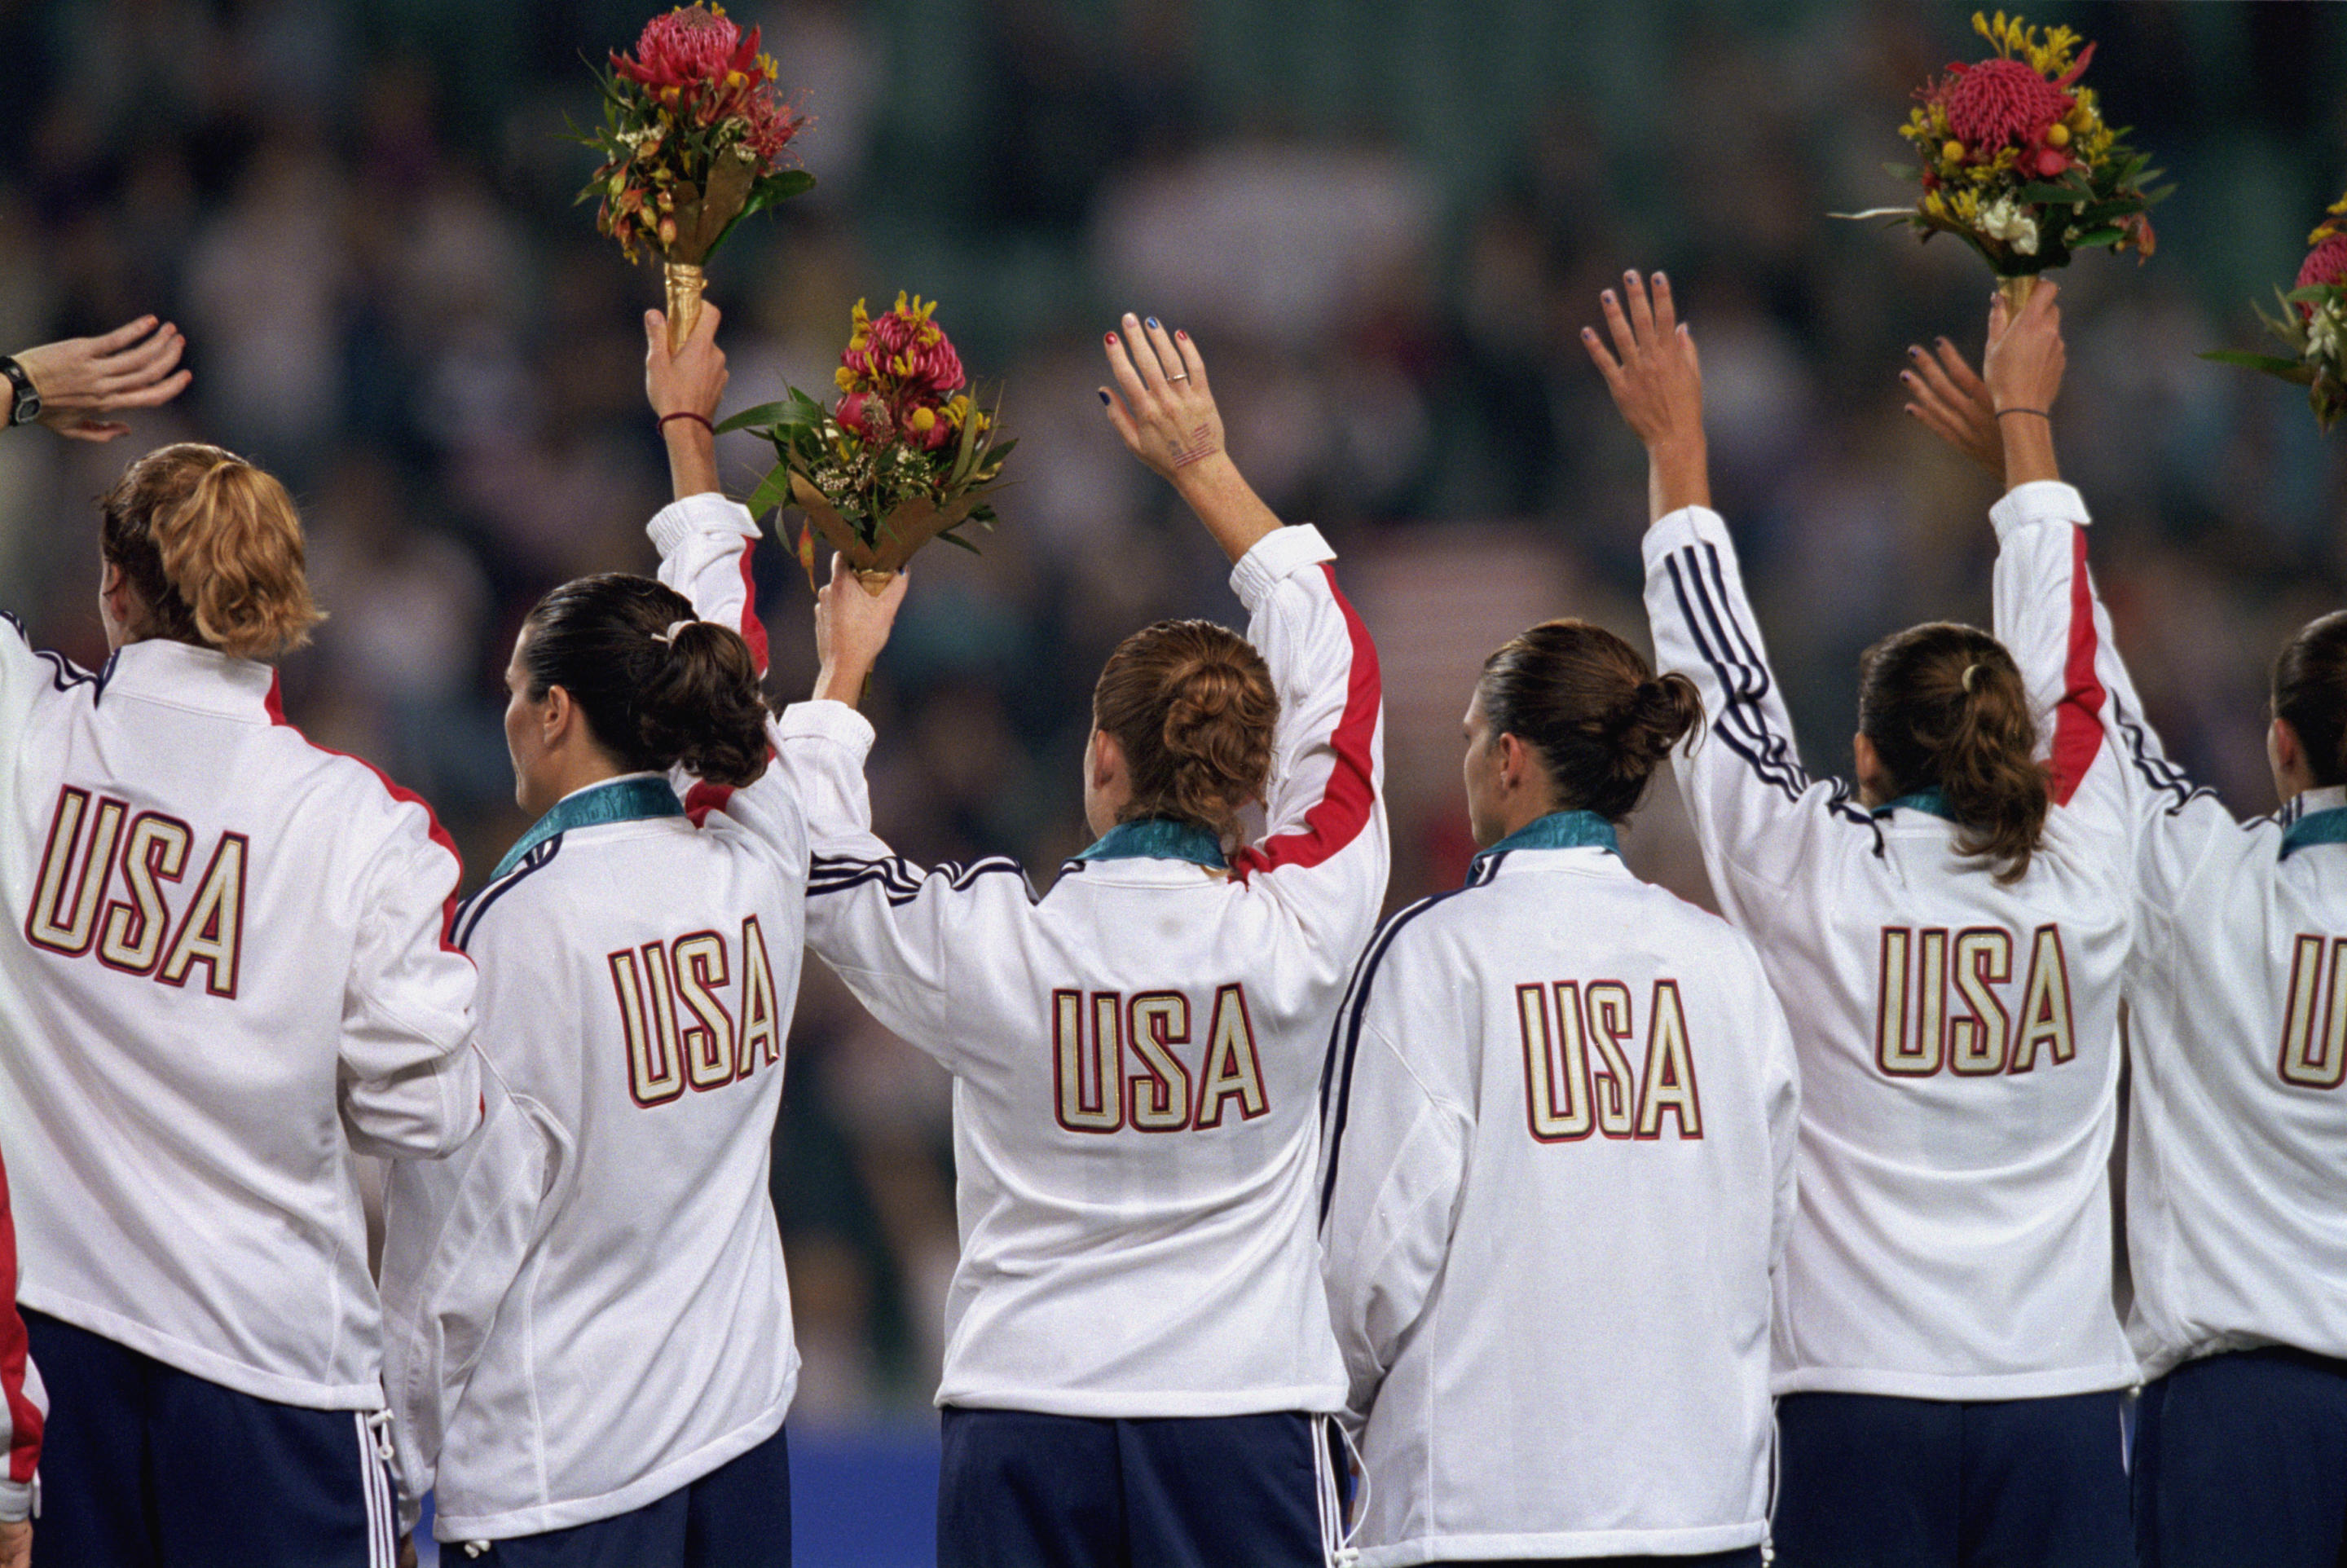 Team USA women's soccer players during the 2000 Olympics in Sydney, Australia. The U.S. soccer system was the 